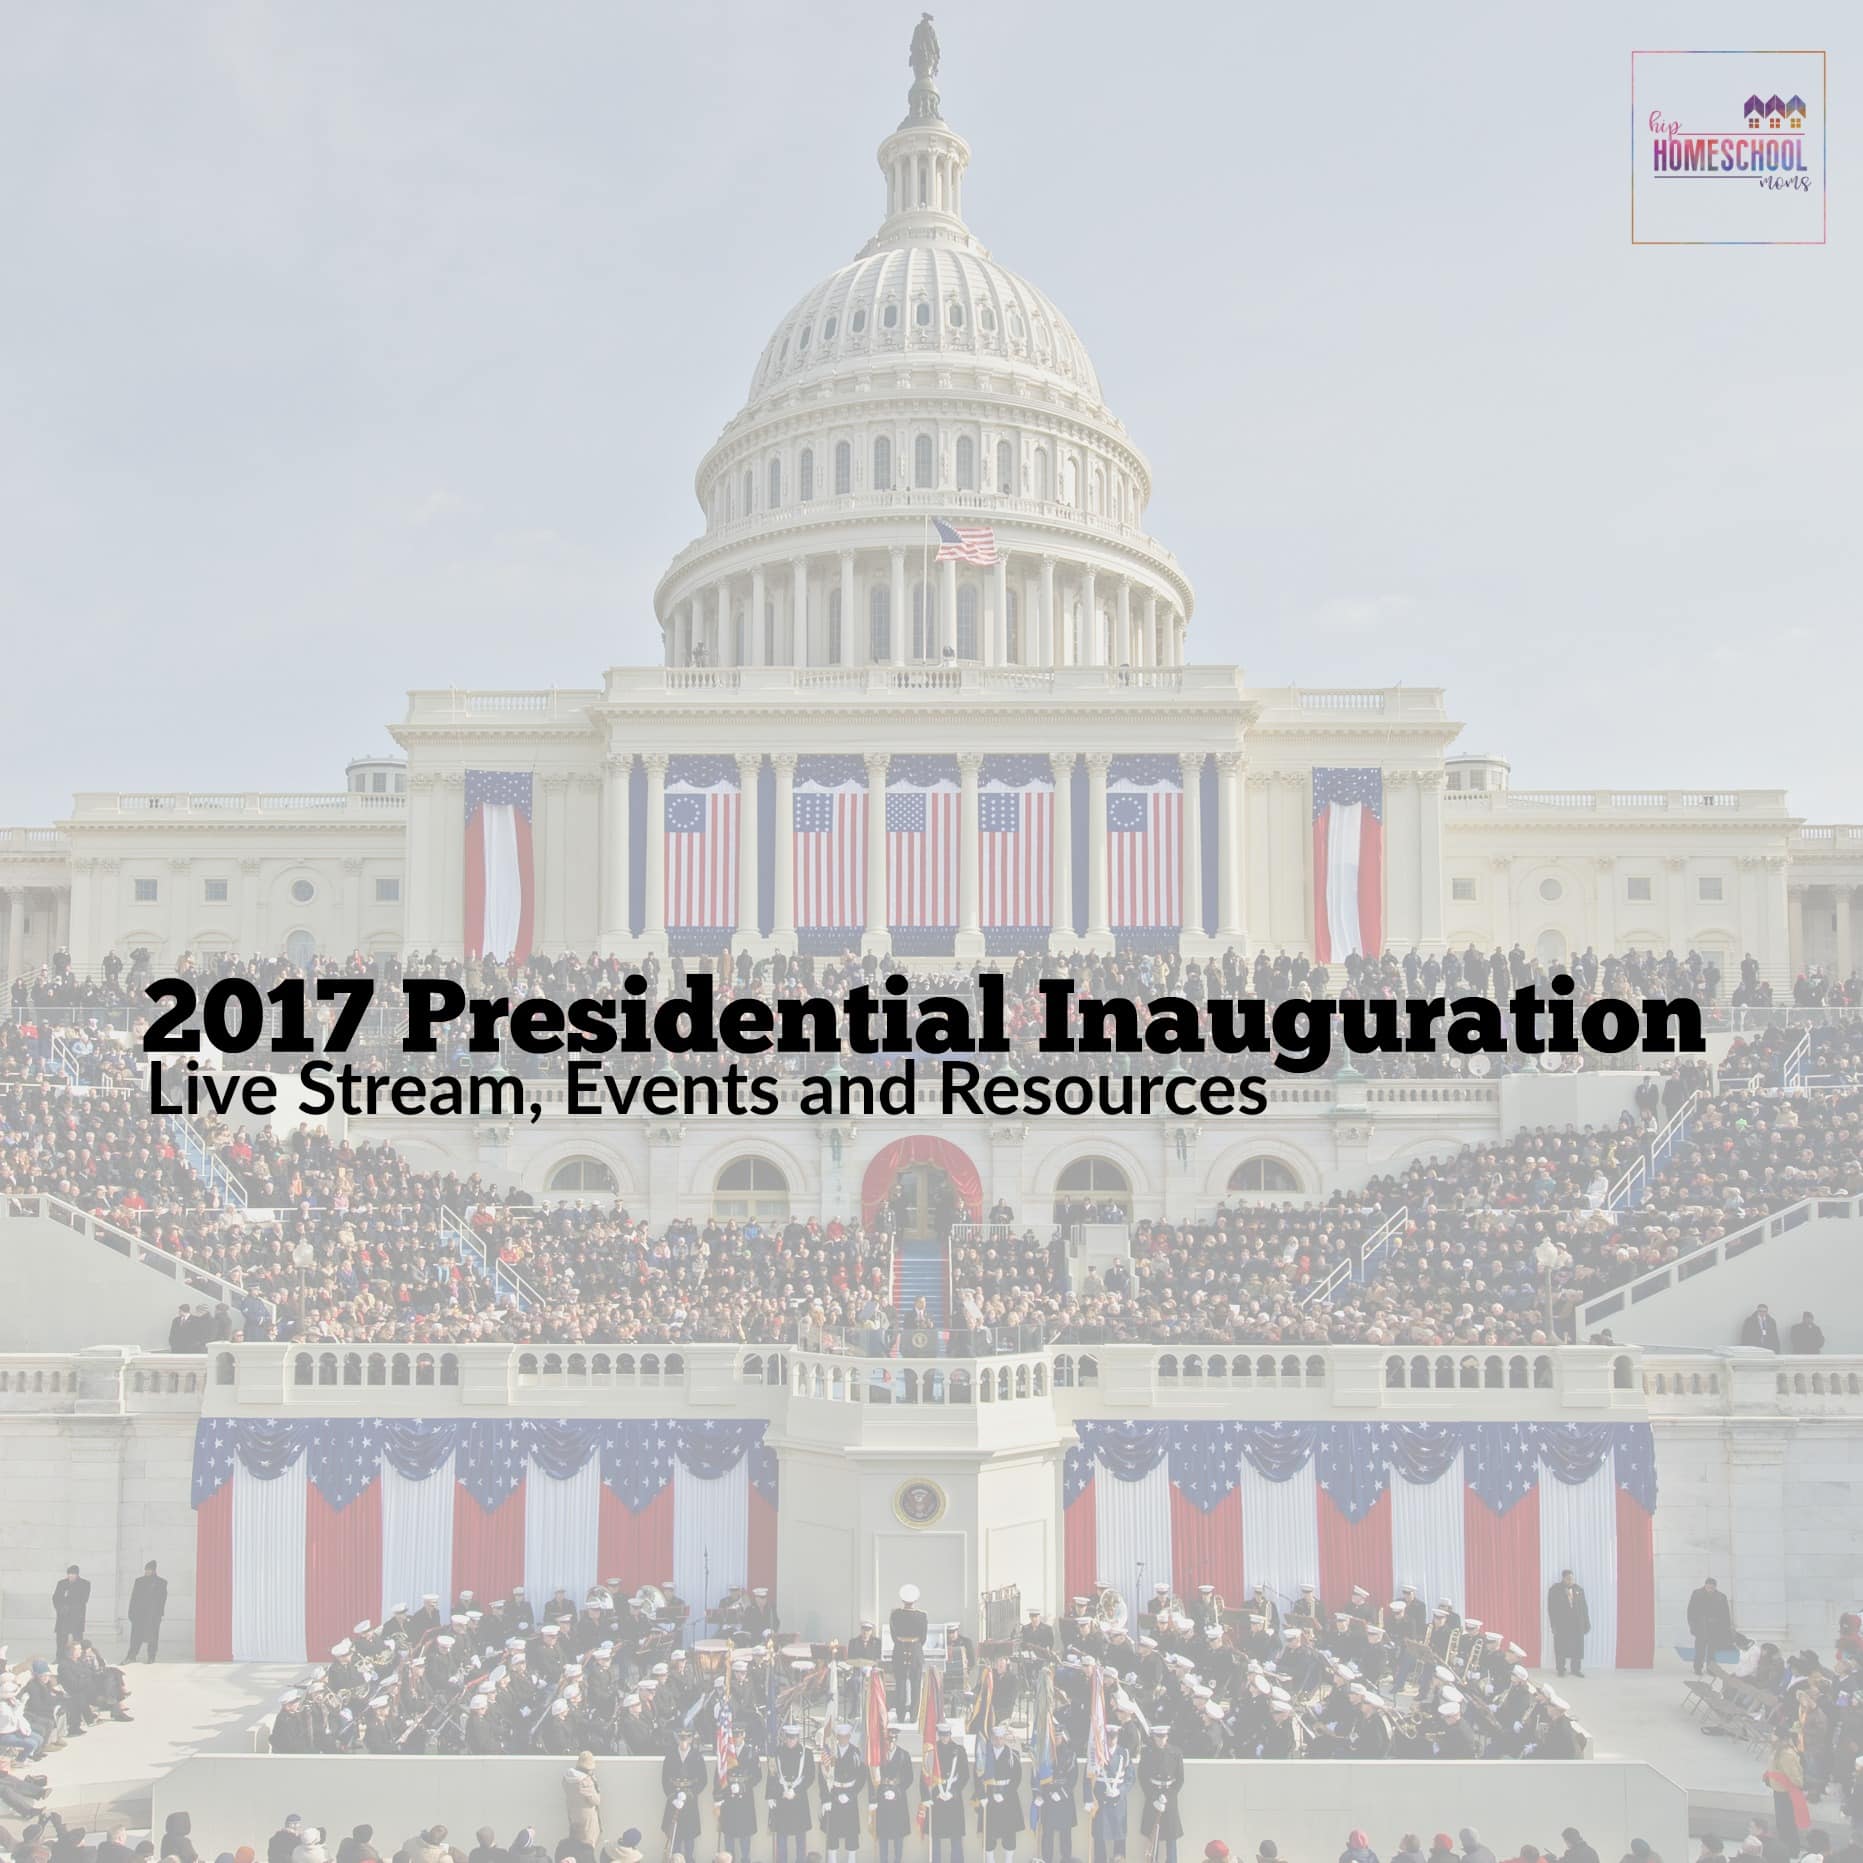 2017 Presidential Inauguration Live Stream, Events and Resources